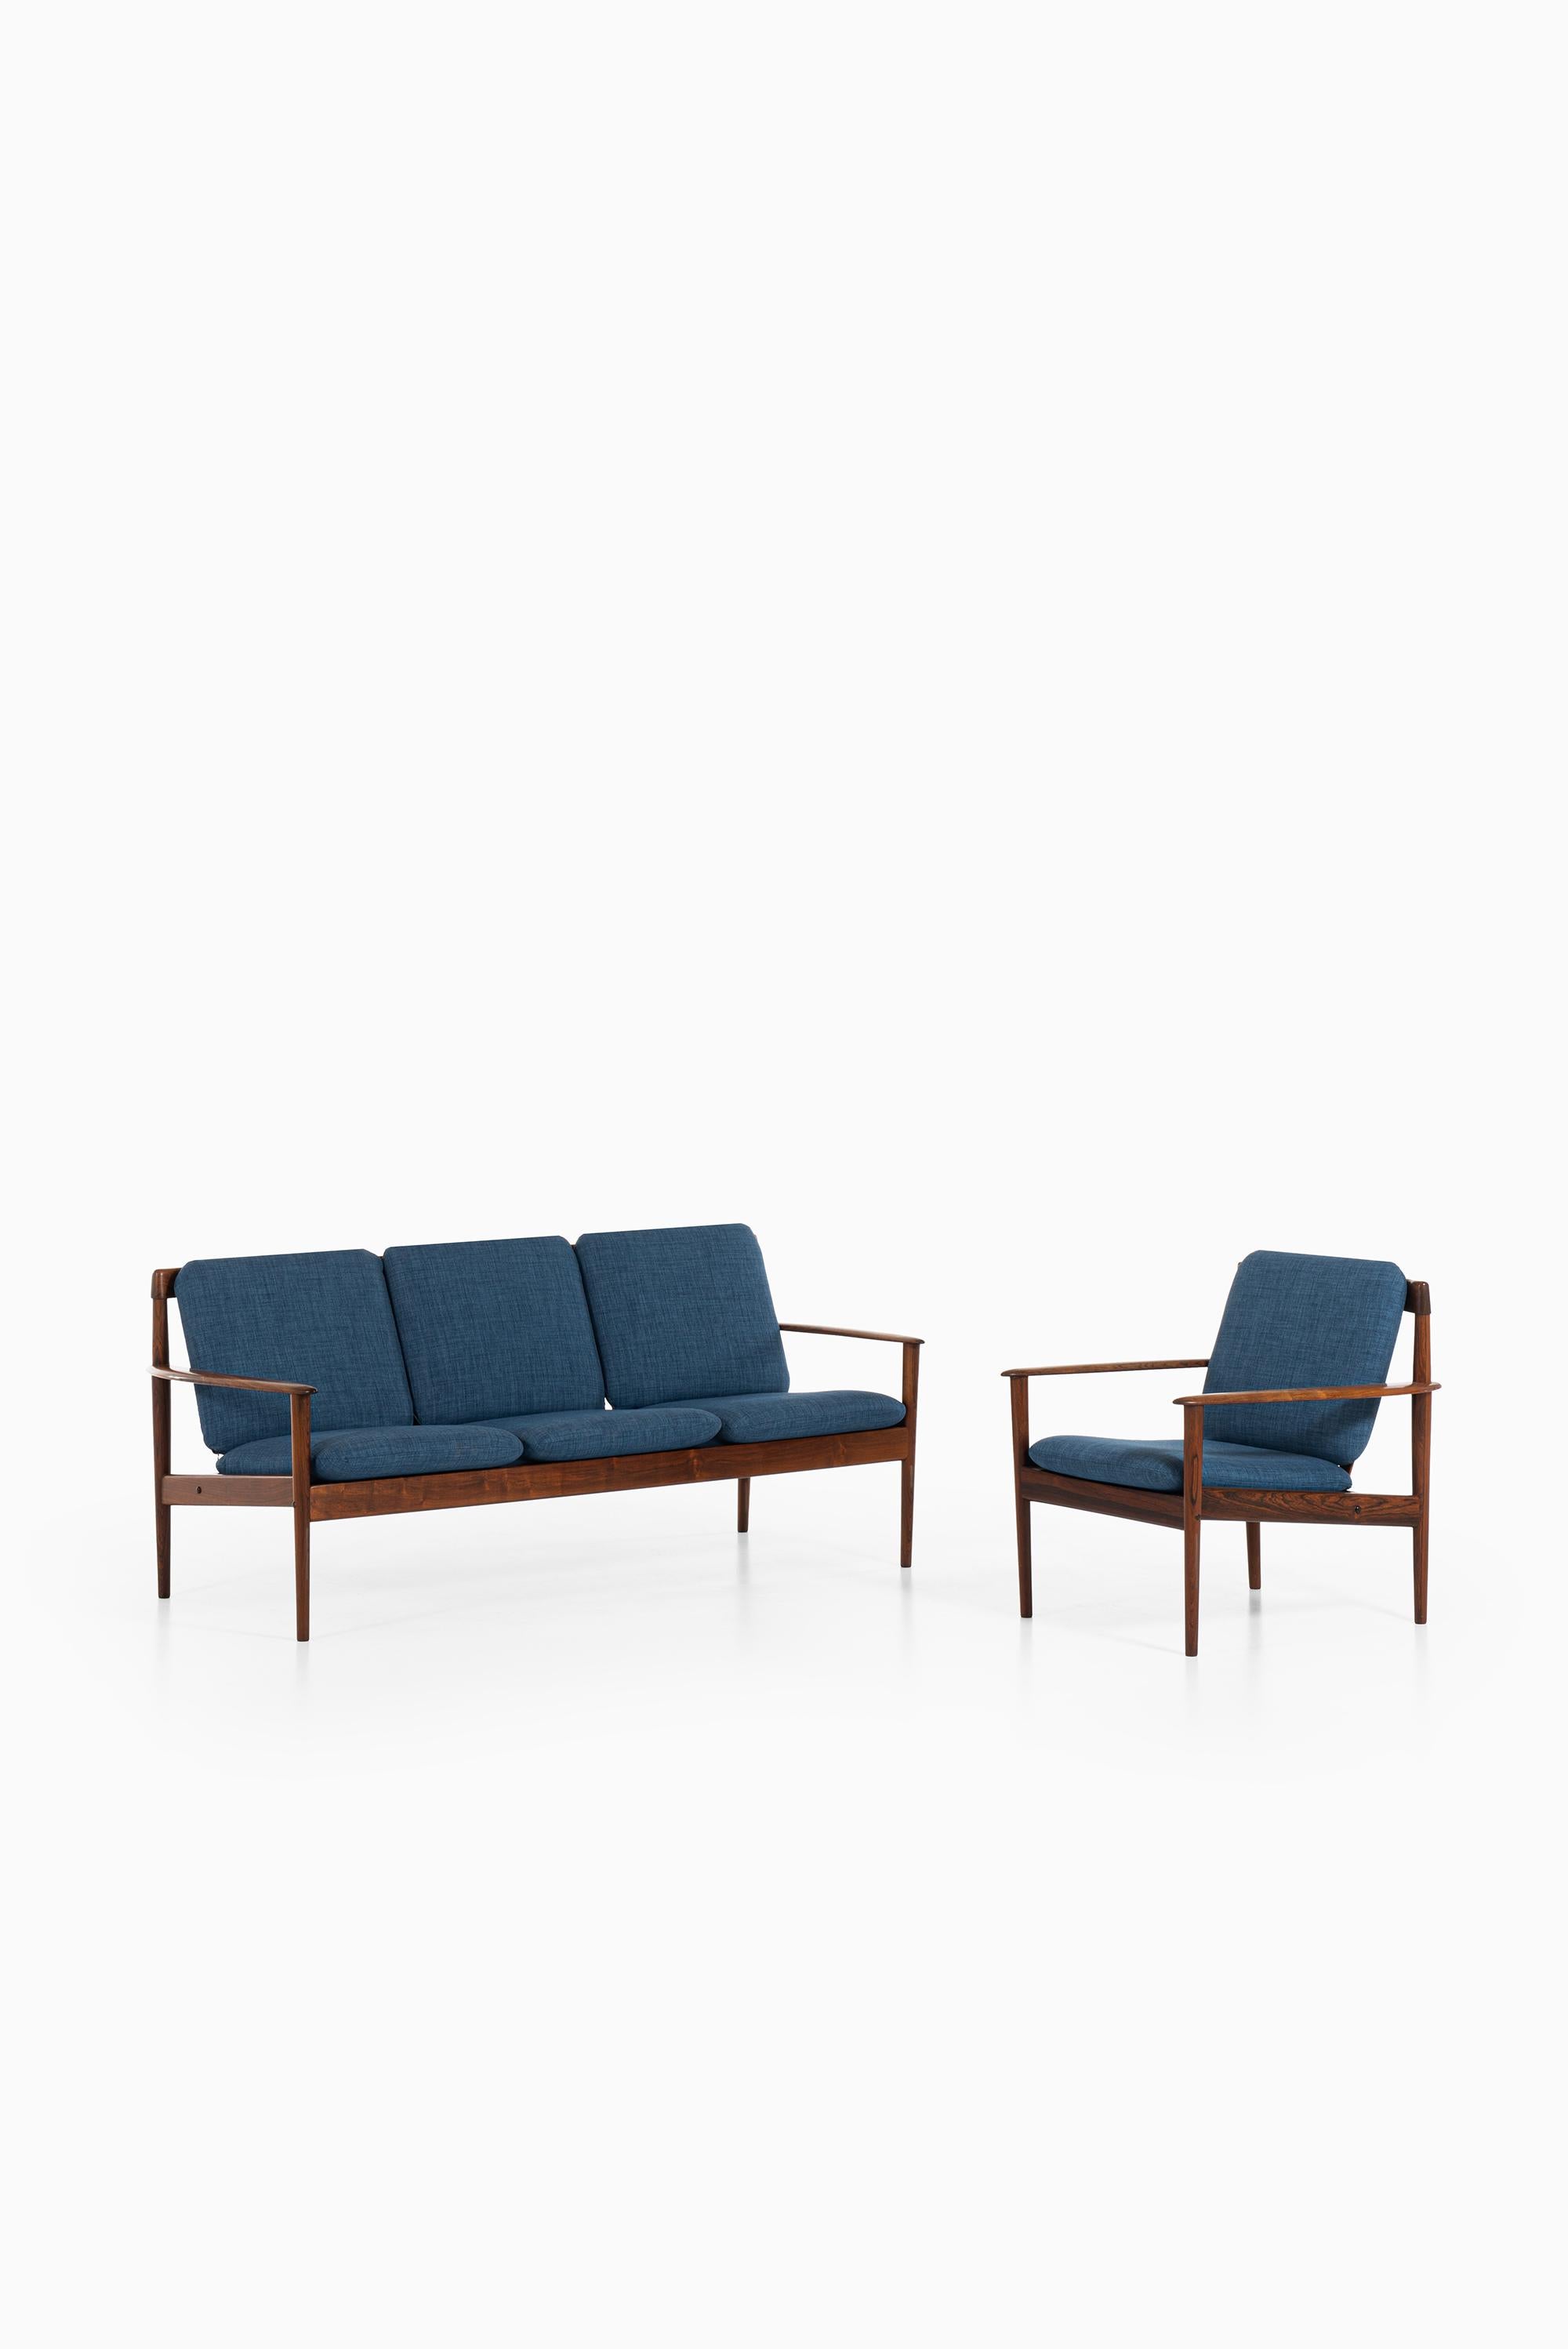 Rare easy chair model 56 designed by Grete Jalk. Produced by P. Jeppesens Møbelfabrik in Denmark. Matching sofa is also available.